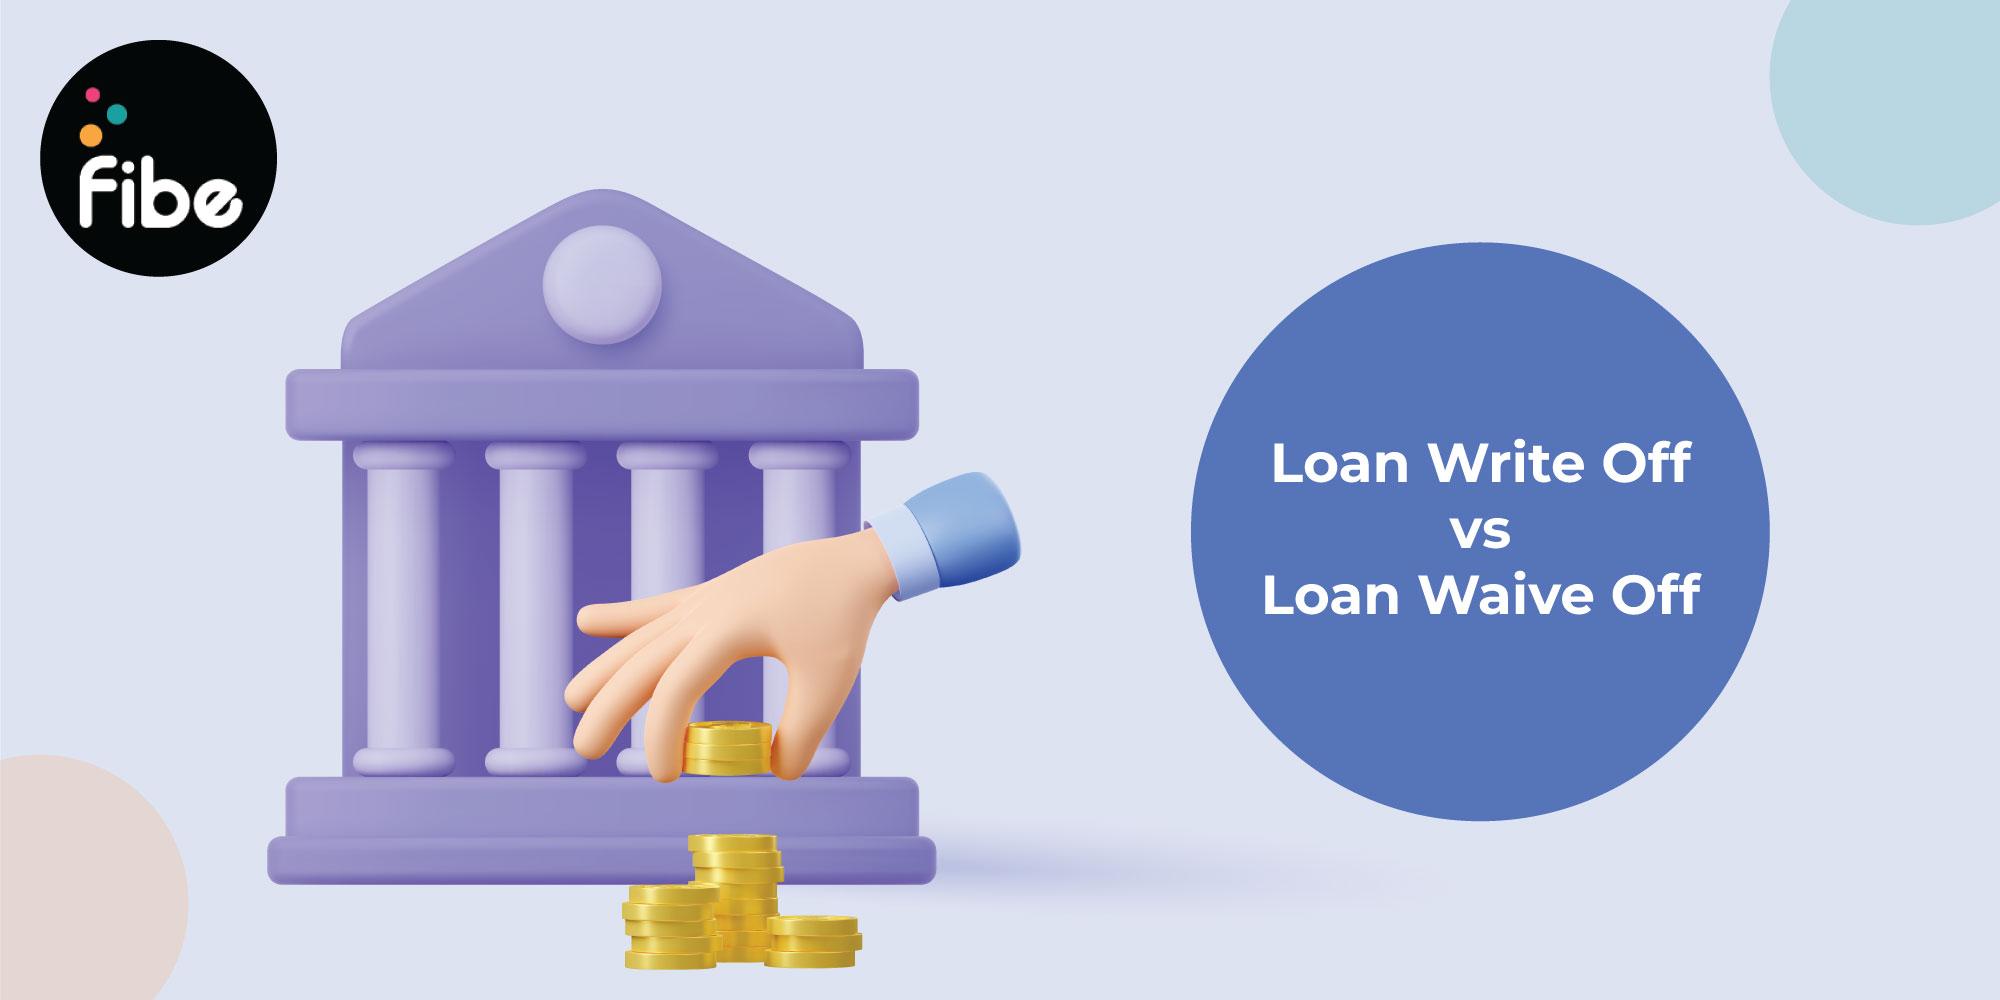 Important differences between a loan write-off and waive-off